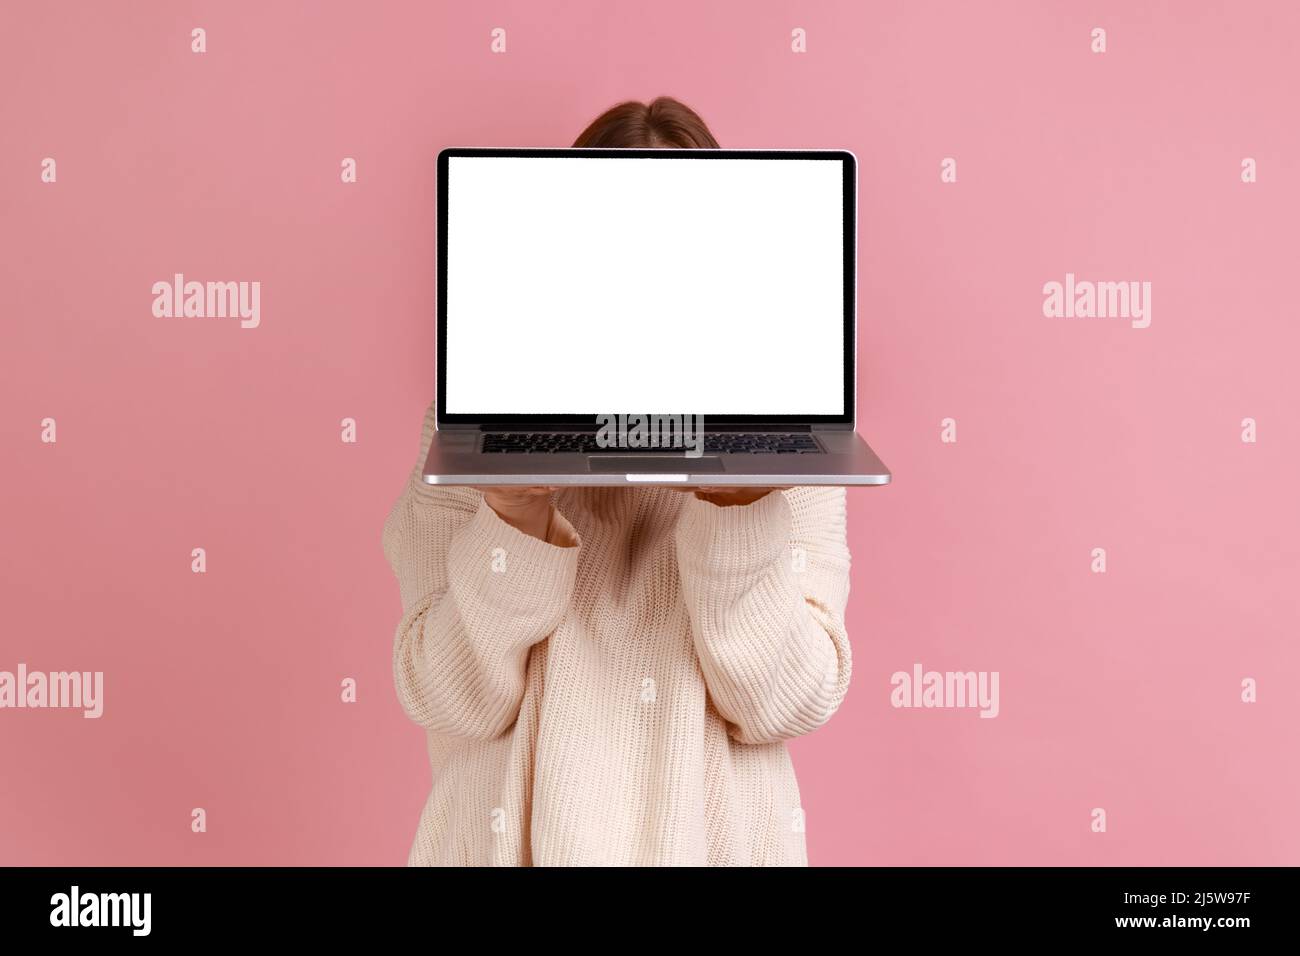 Portrait of blond woman holding laptop in hands, hiding her face behind notebook with empty display with copy space, wearing white sweater. Indoor studio shot isolated on pink background. Stock Photo